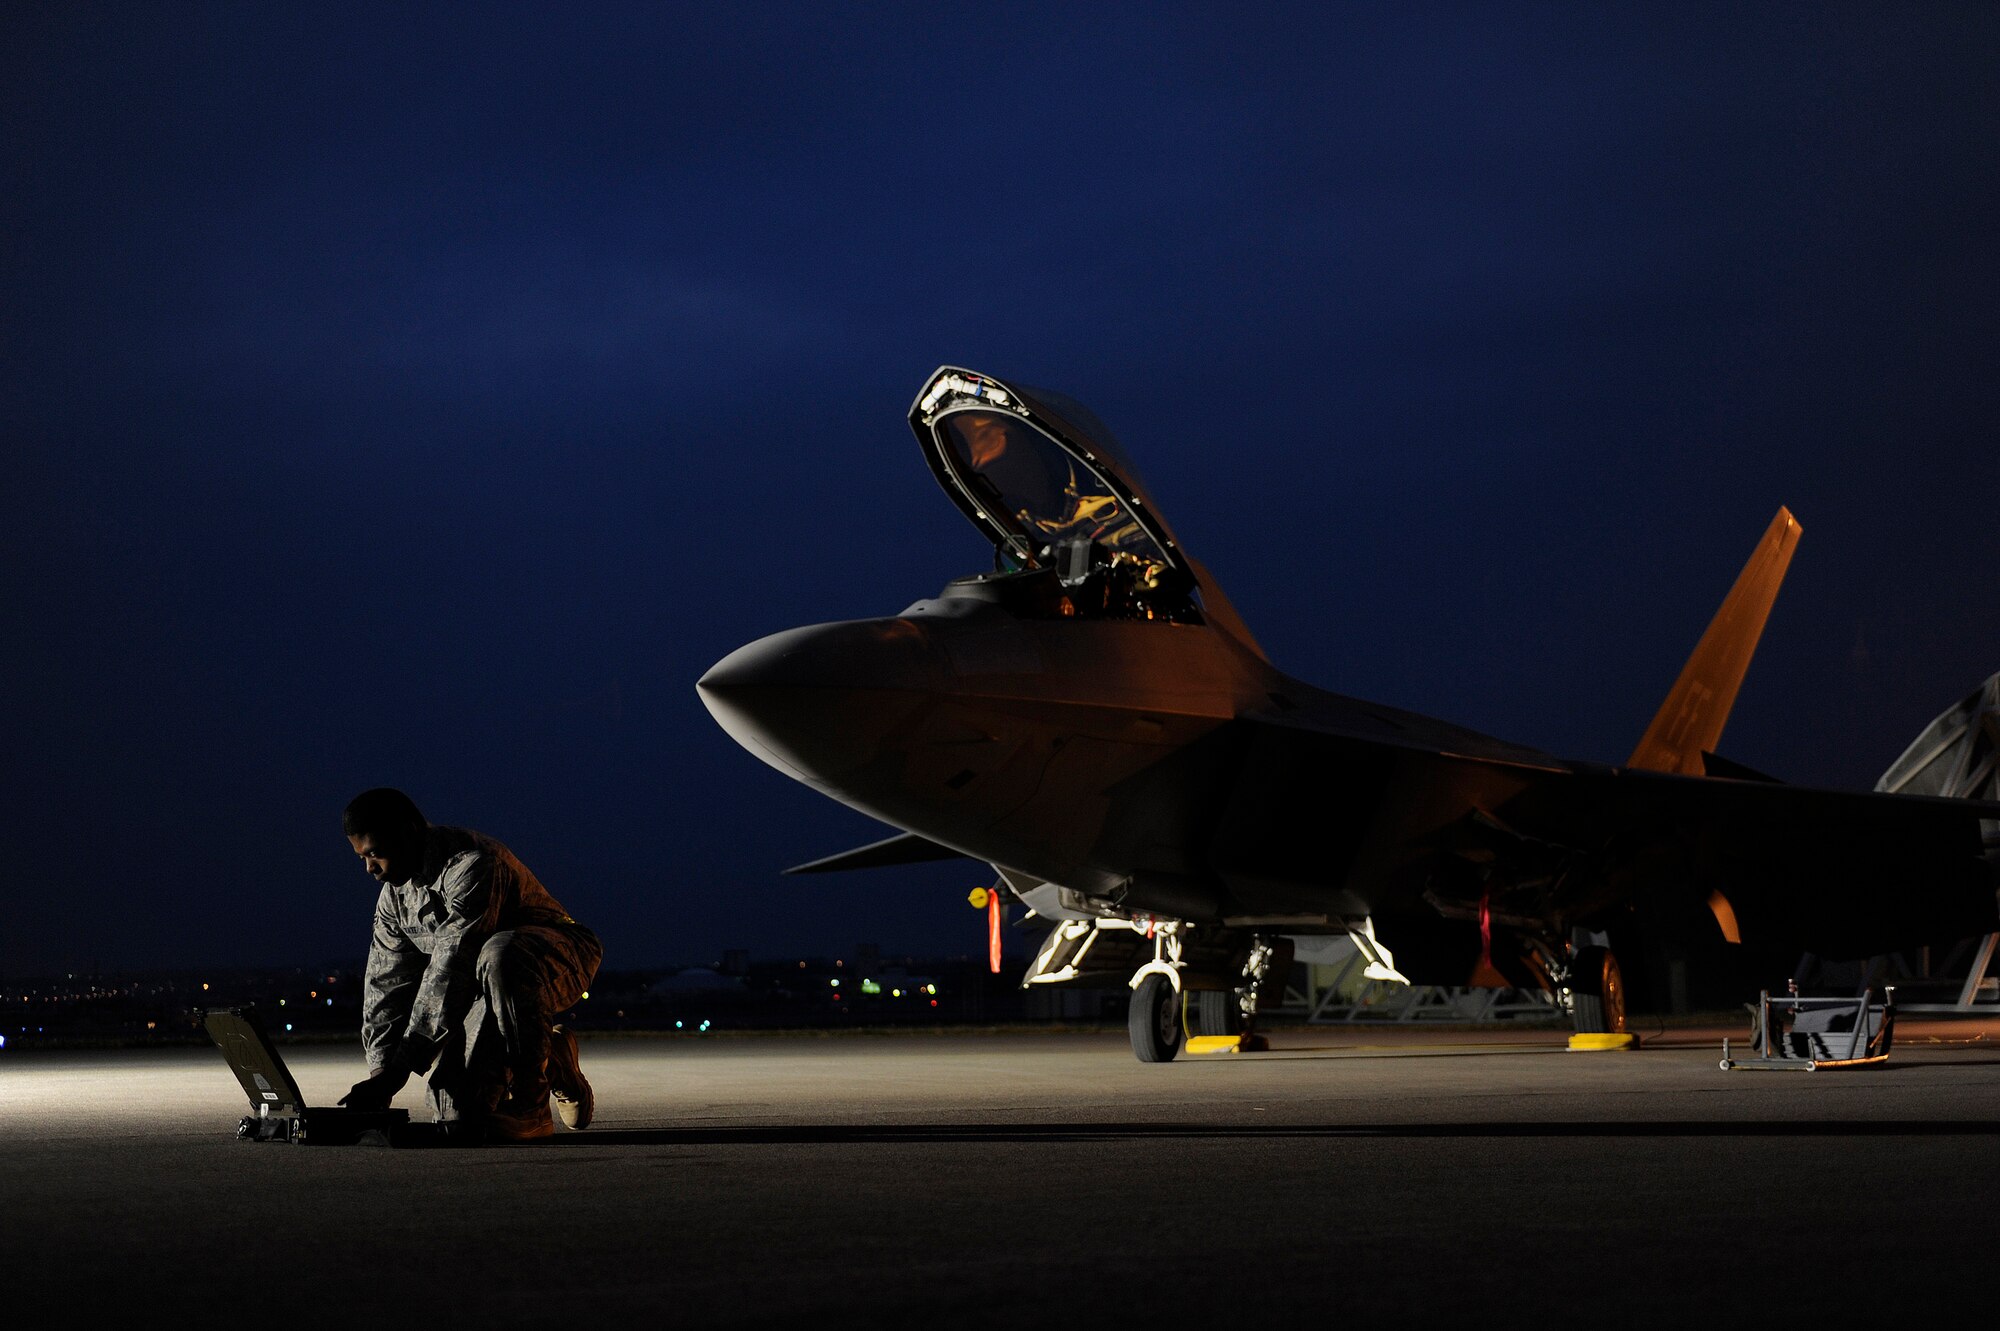 U.S. Air Force Airman 1st Class Aaron Tate inputs data into his portable maintenance aide in front of his F-22A Raptor 21, 2009 at Kadena Air Base, Japan. Airman 1st Class Aaron Tate is deployed from the 27th Fighter Squadron Langley Air Force Base, Va. (U.S. Air Force photo by Master Sgt. Andy Dunaway) (Released)
